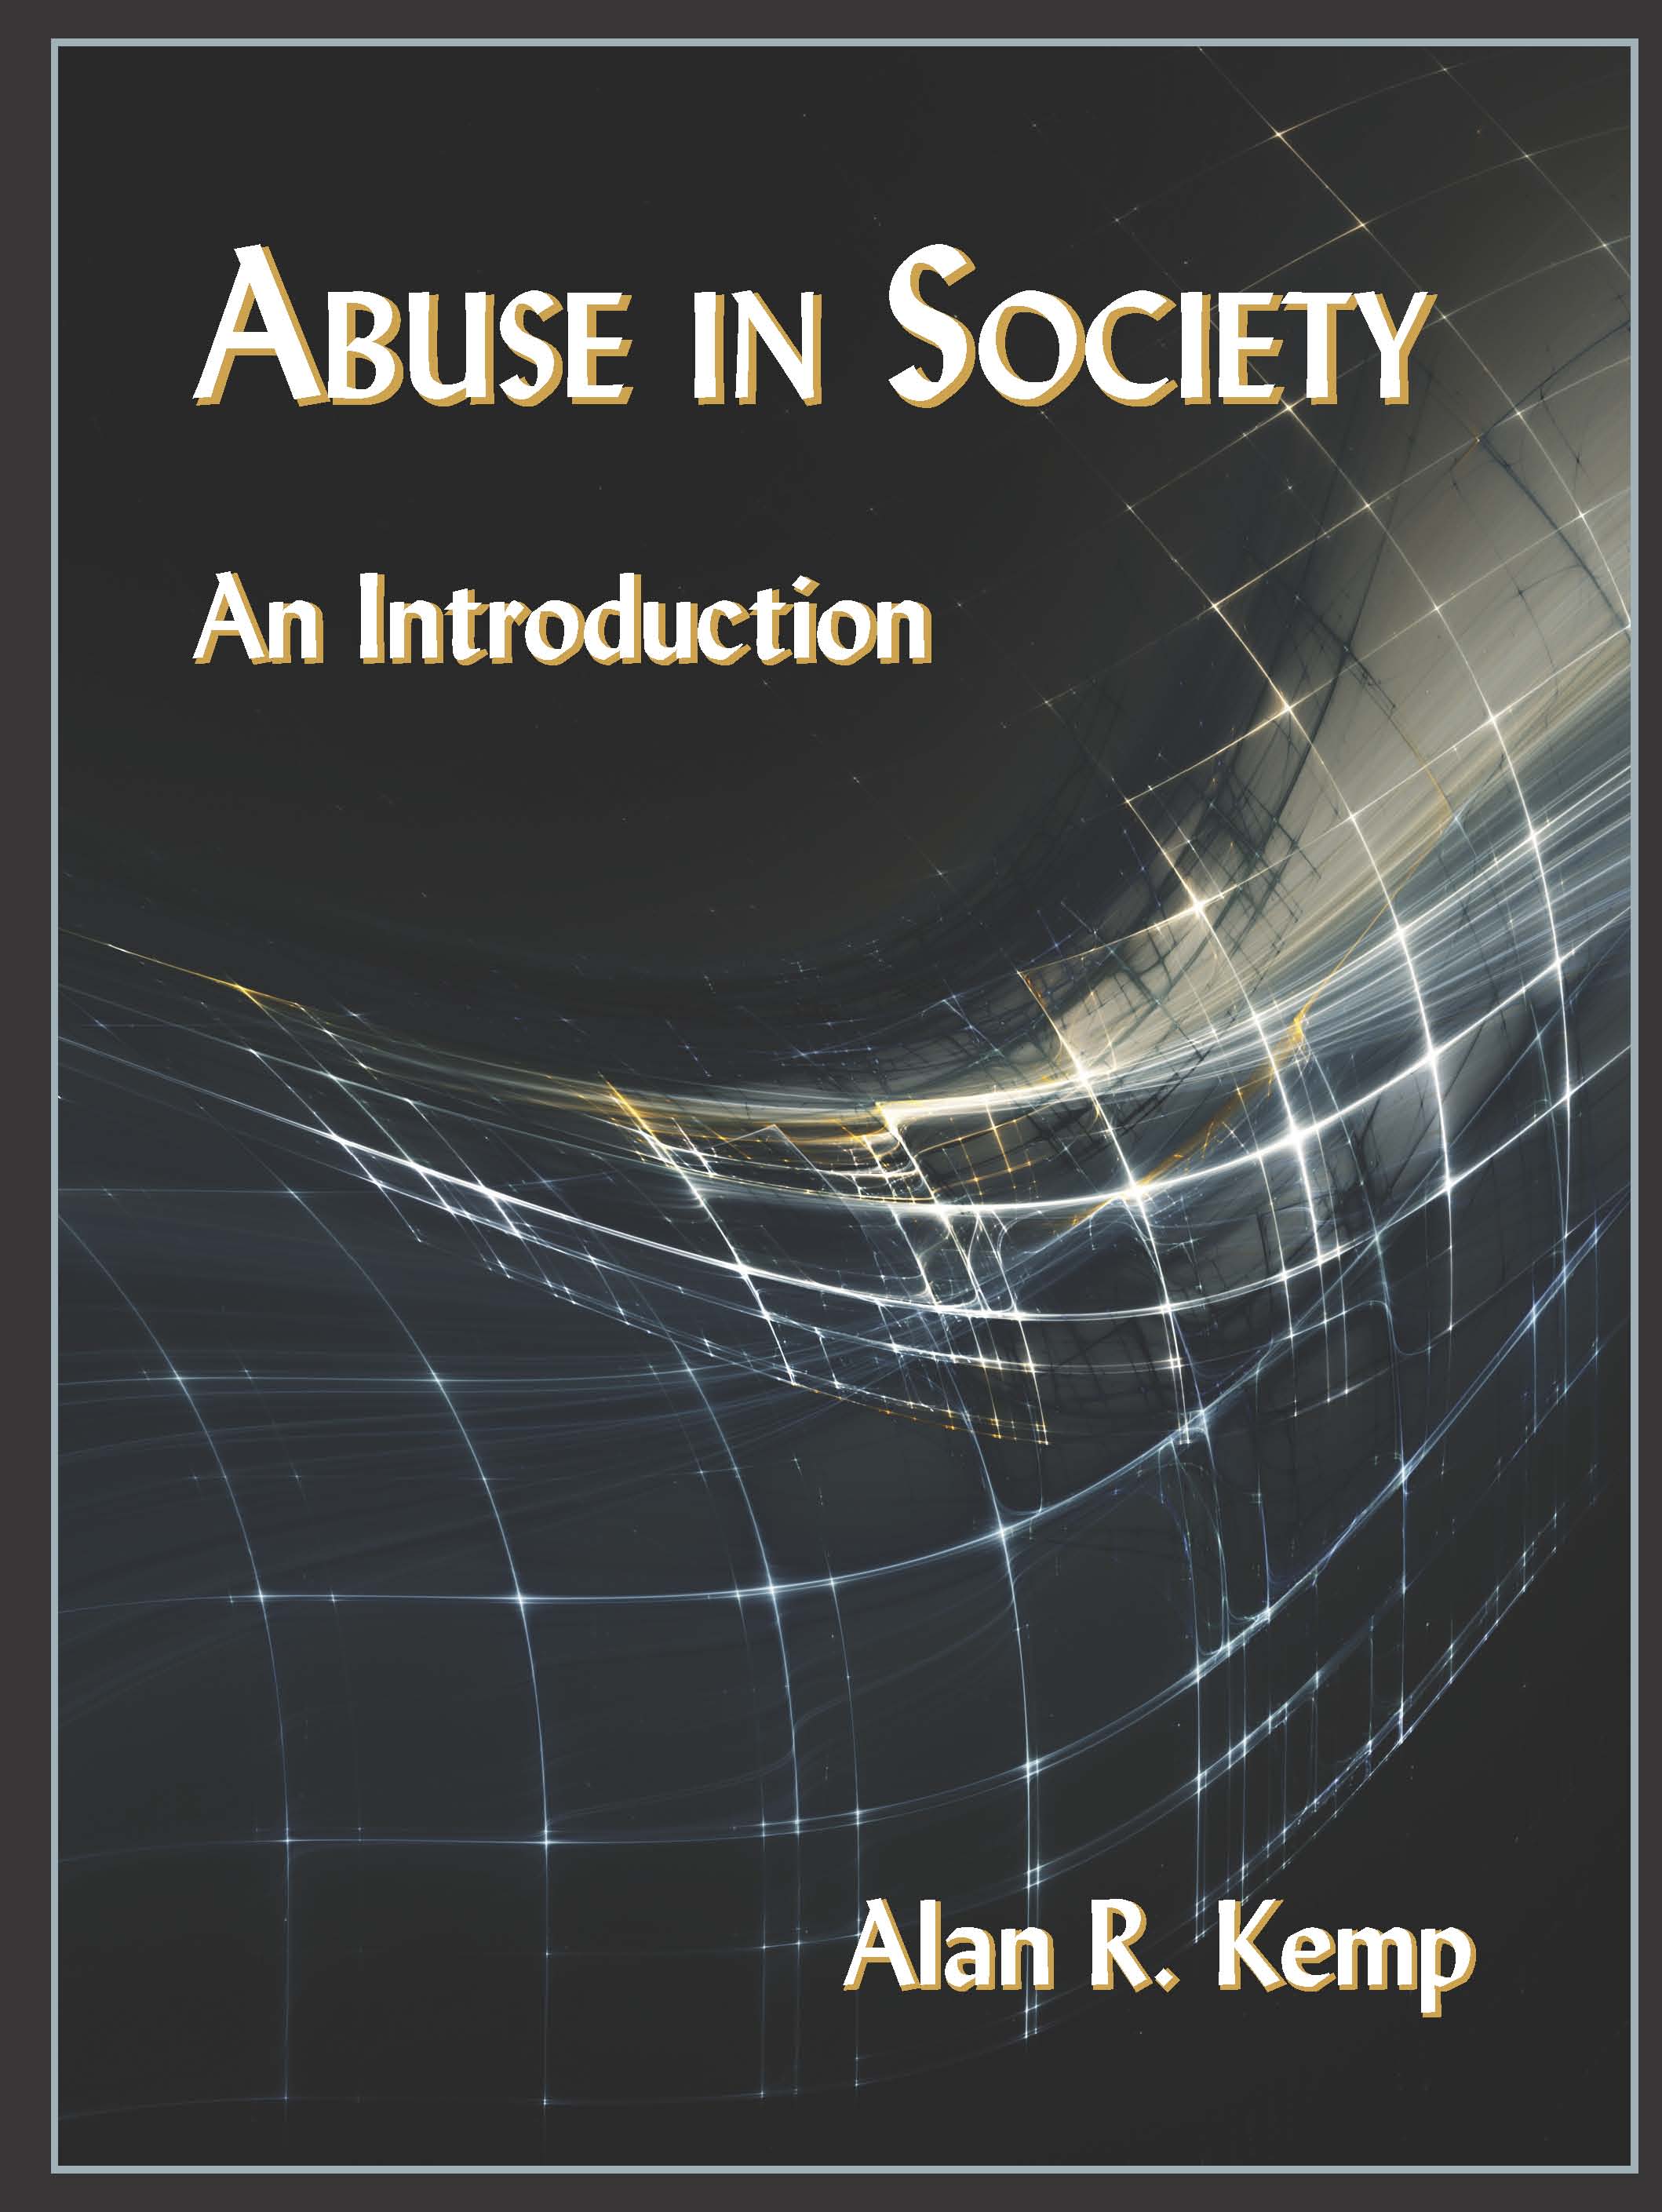 Abuse in Society: An Introduction by Alan R. Kemp